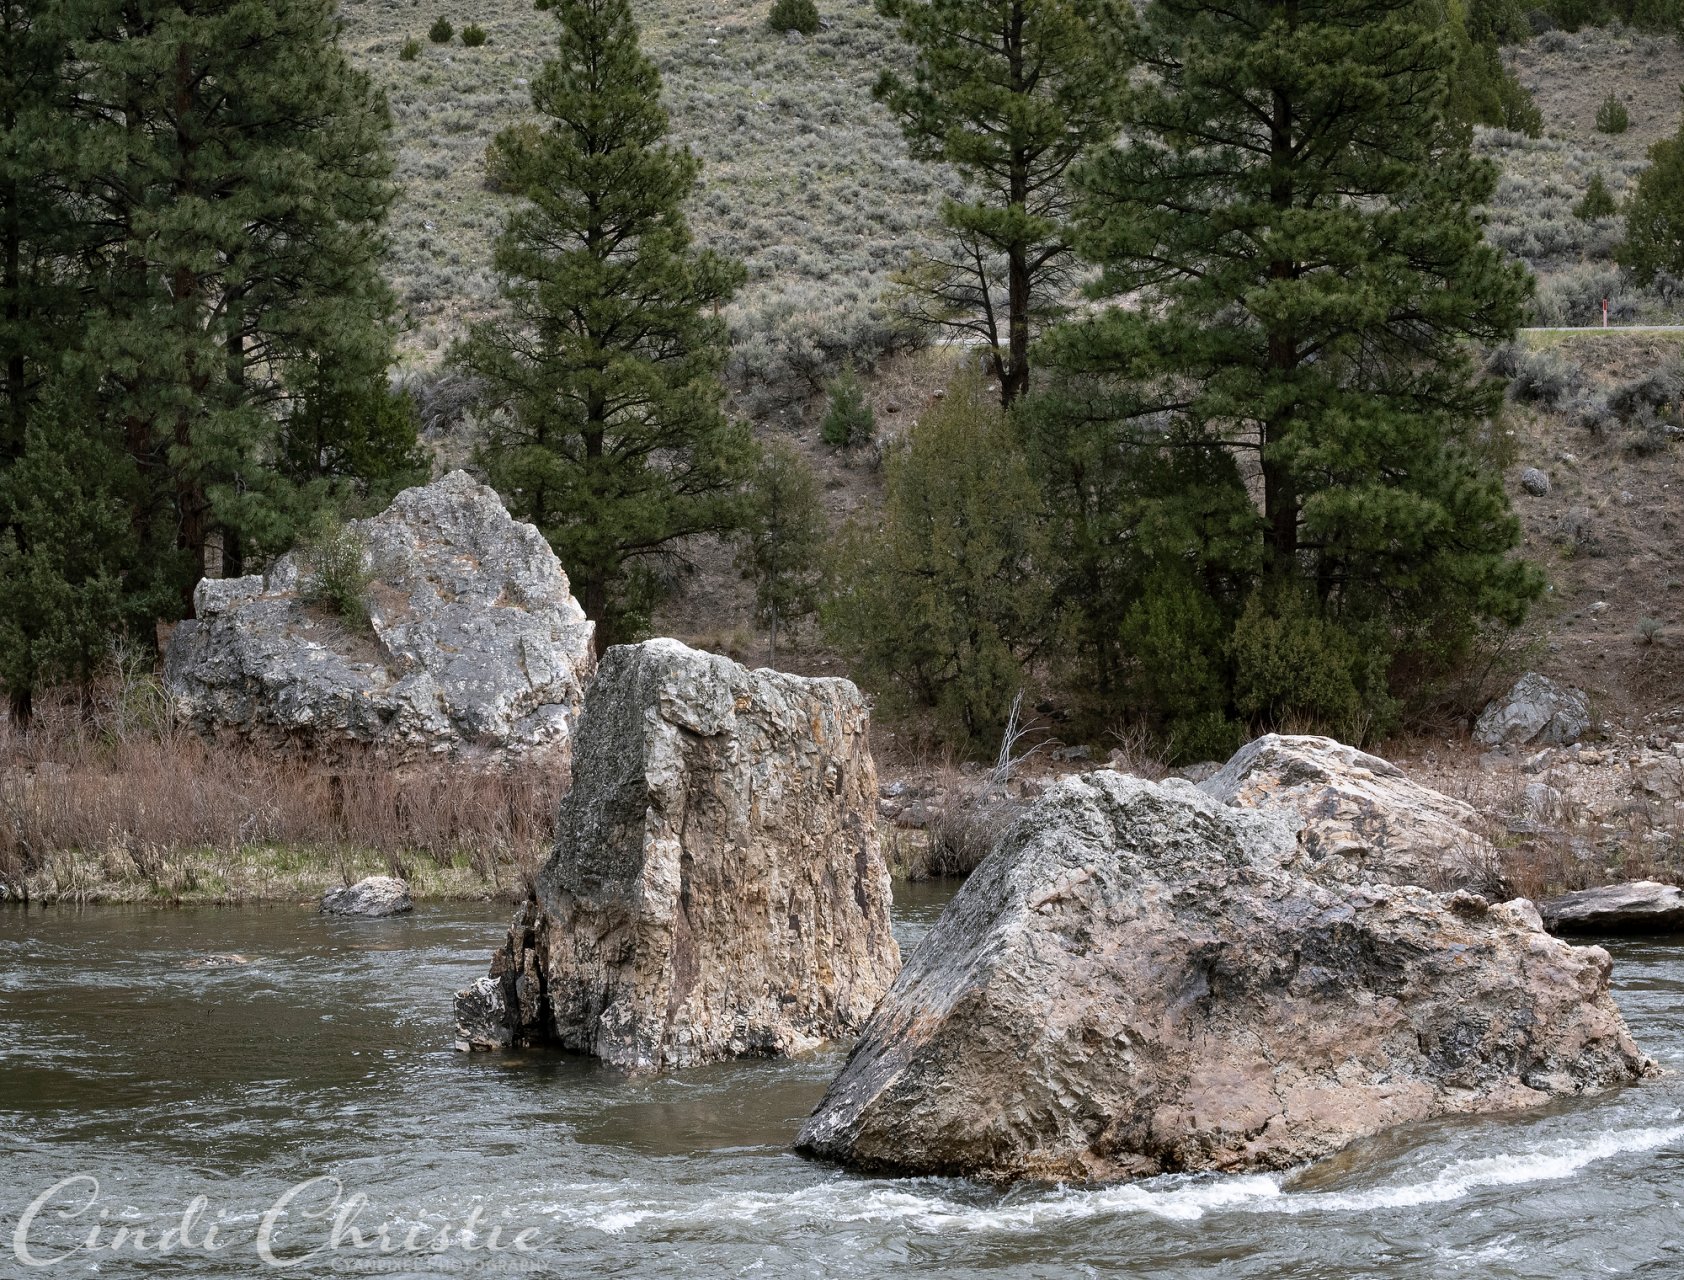 Large boulders in the Salmon River were Dugout Dick's neighbors.